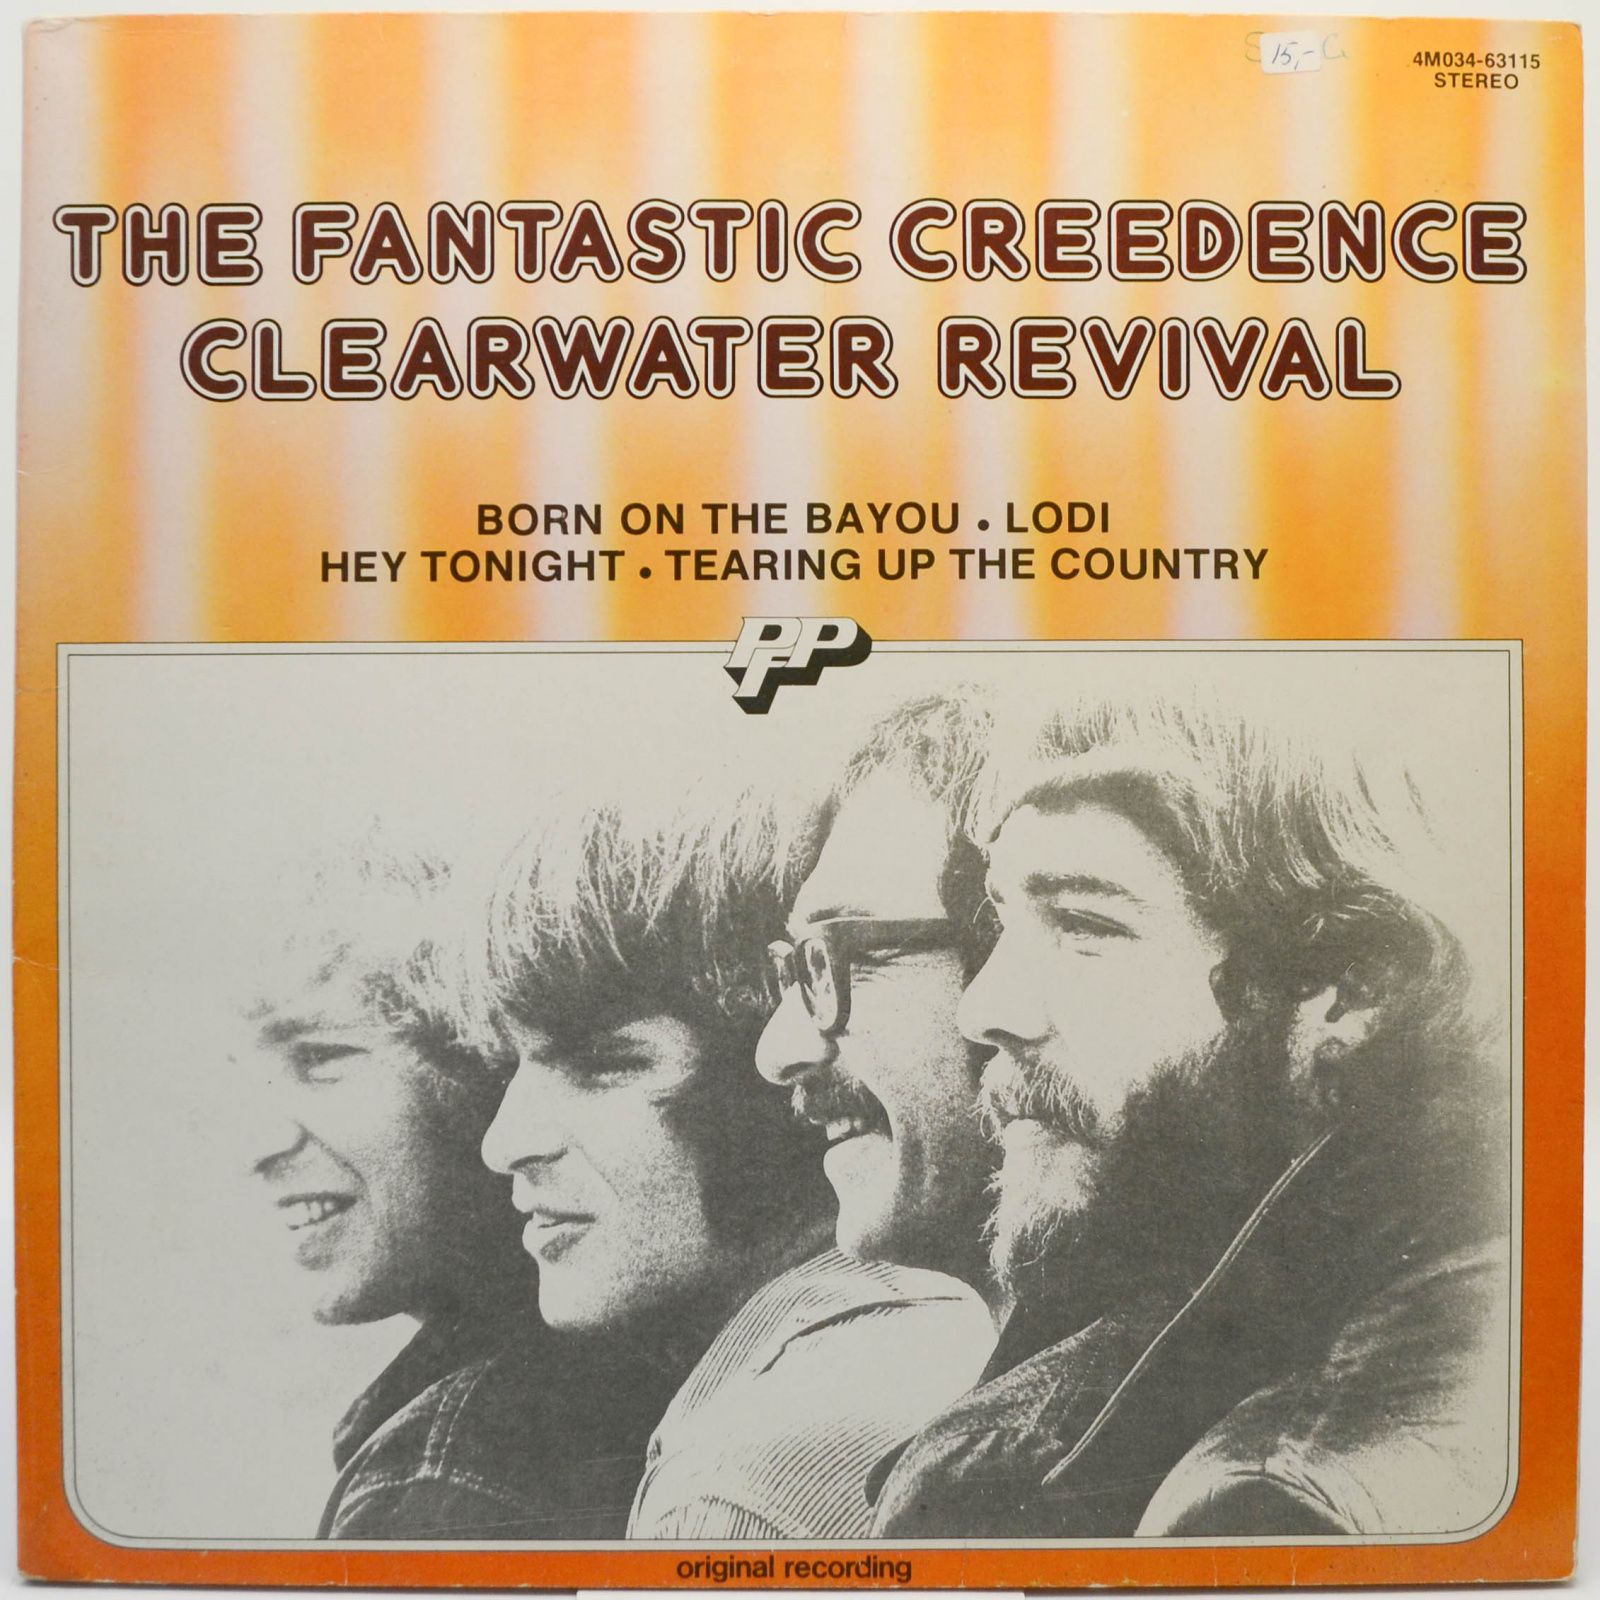 The Fantastic Creedence Clearwater Revival, 1980